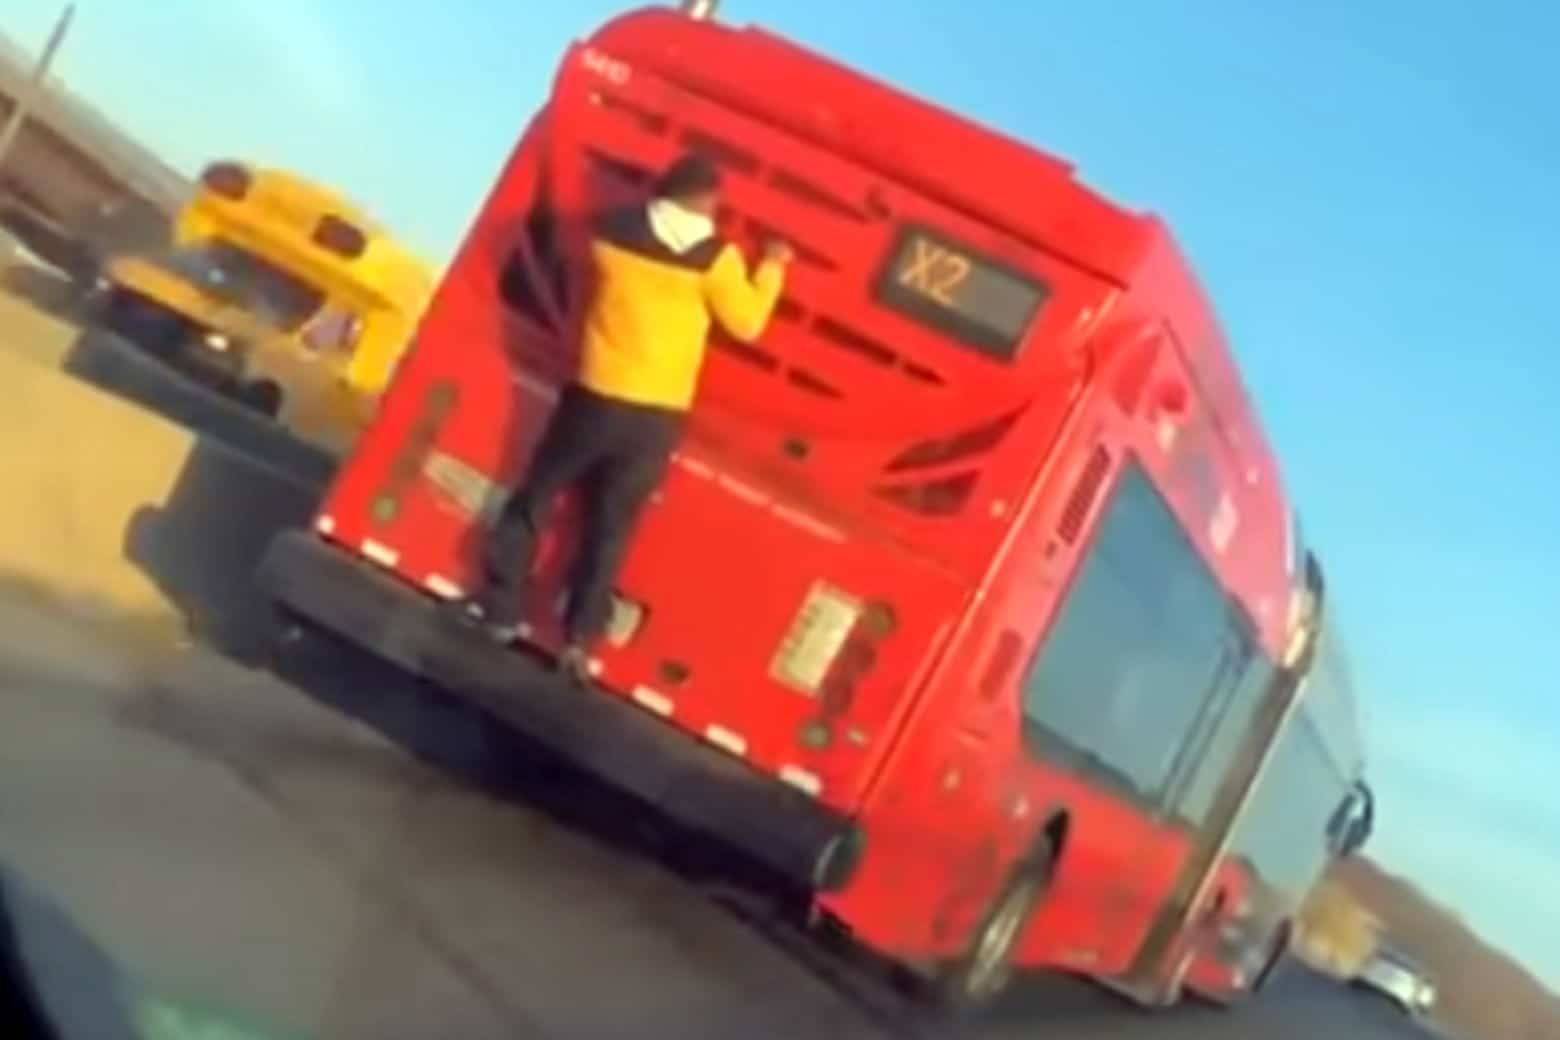 Viral video that lit up the web Tuesday purports to show a man clinging to the back of an X2 Metrobus in D.C. (@RastaTahj via Twitter)